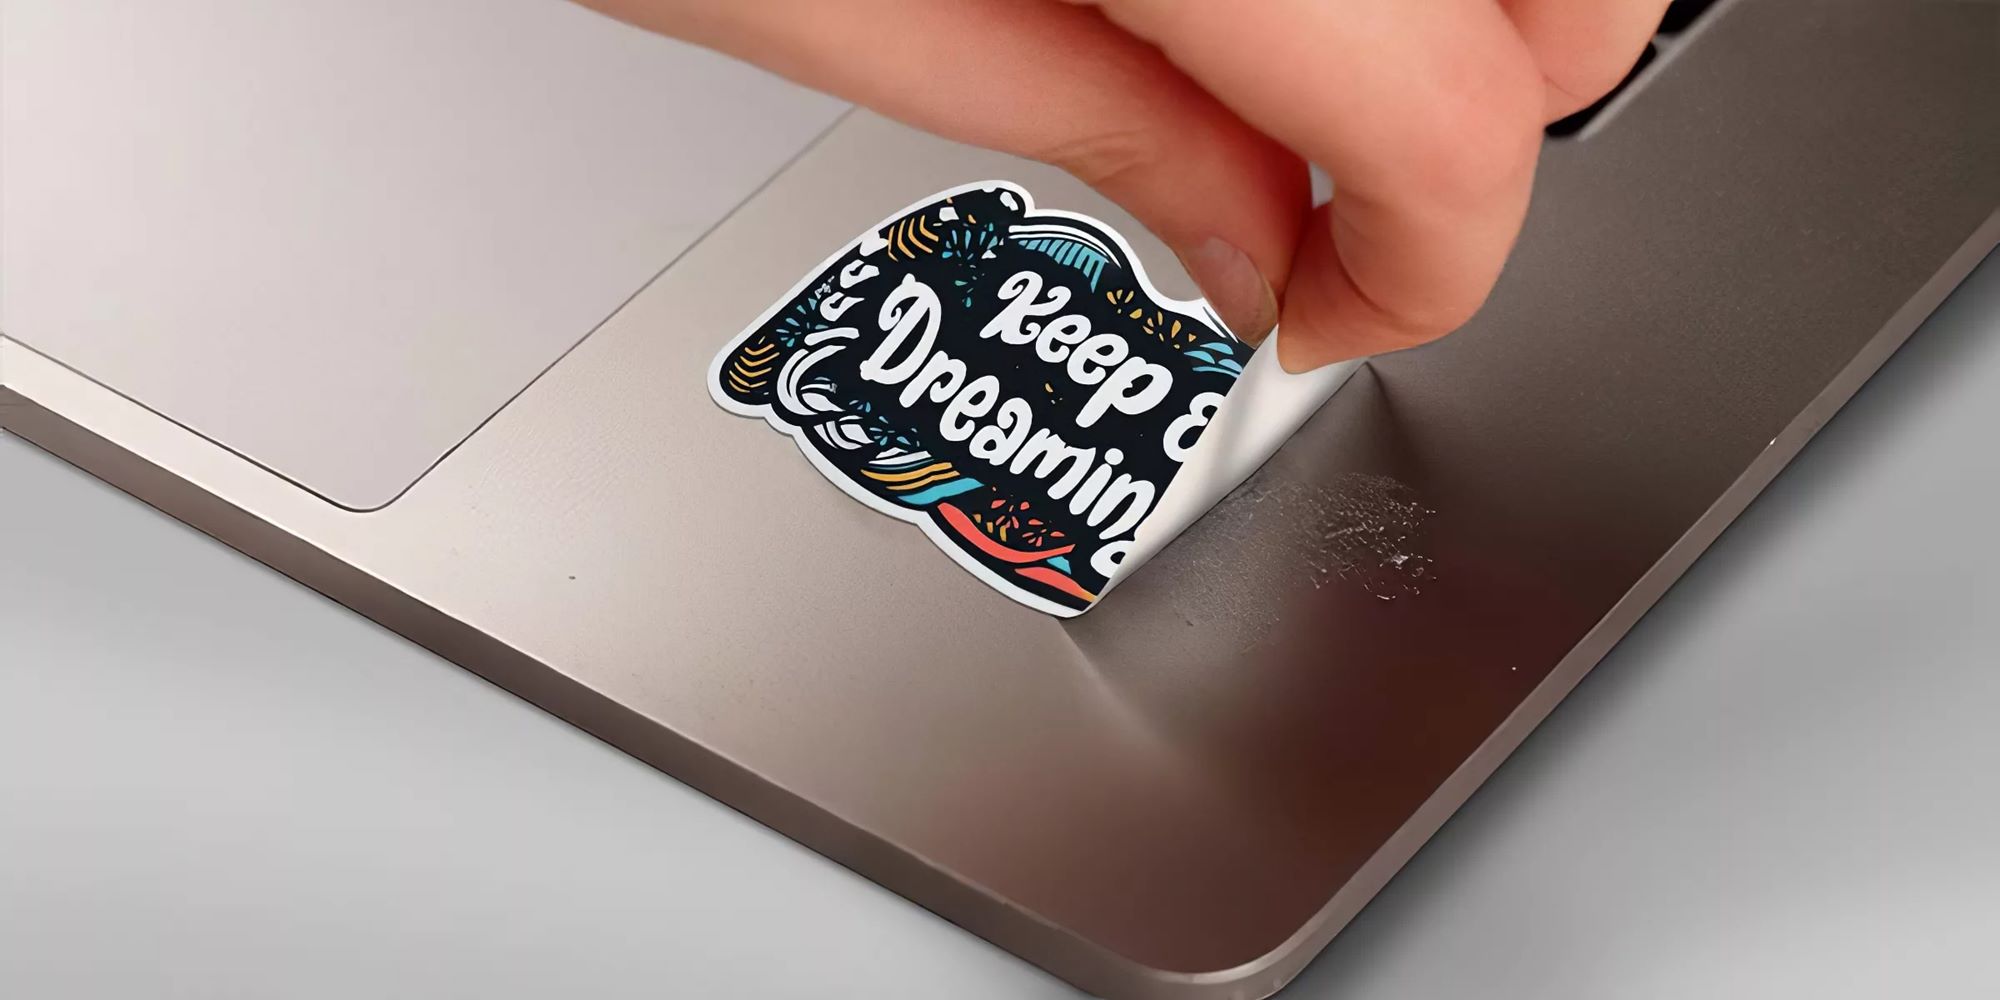 How To Remove Laptop Stickers